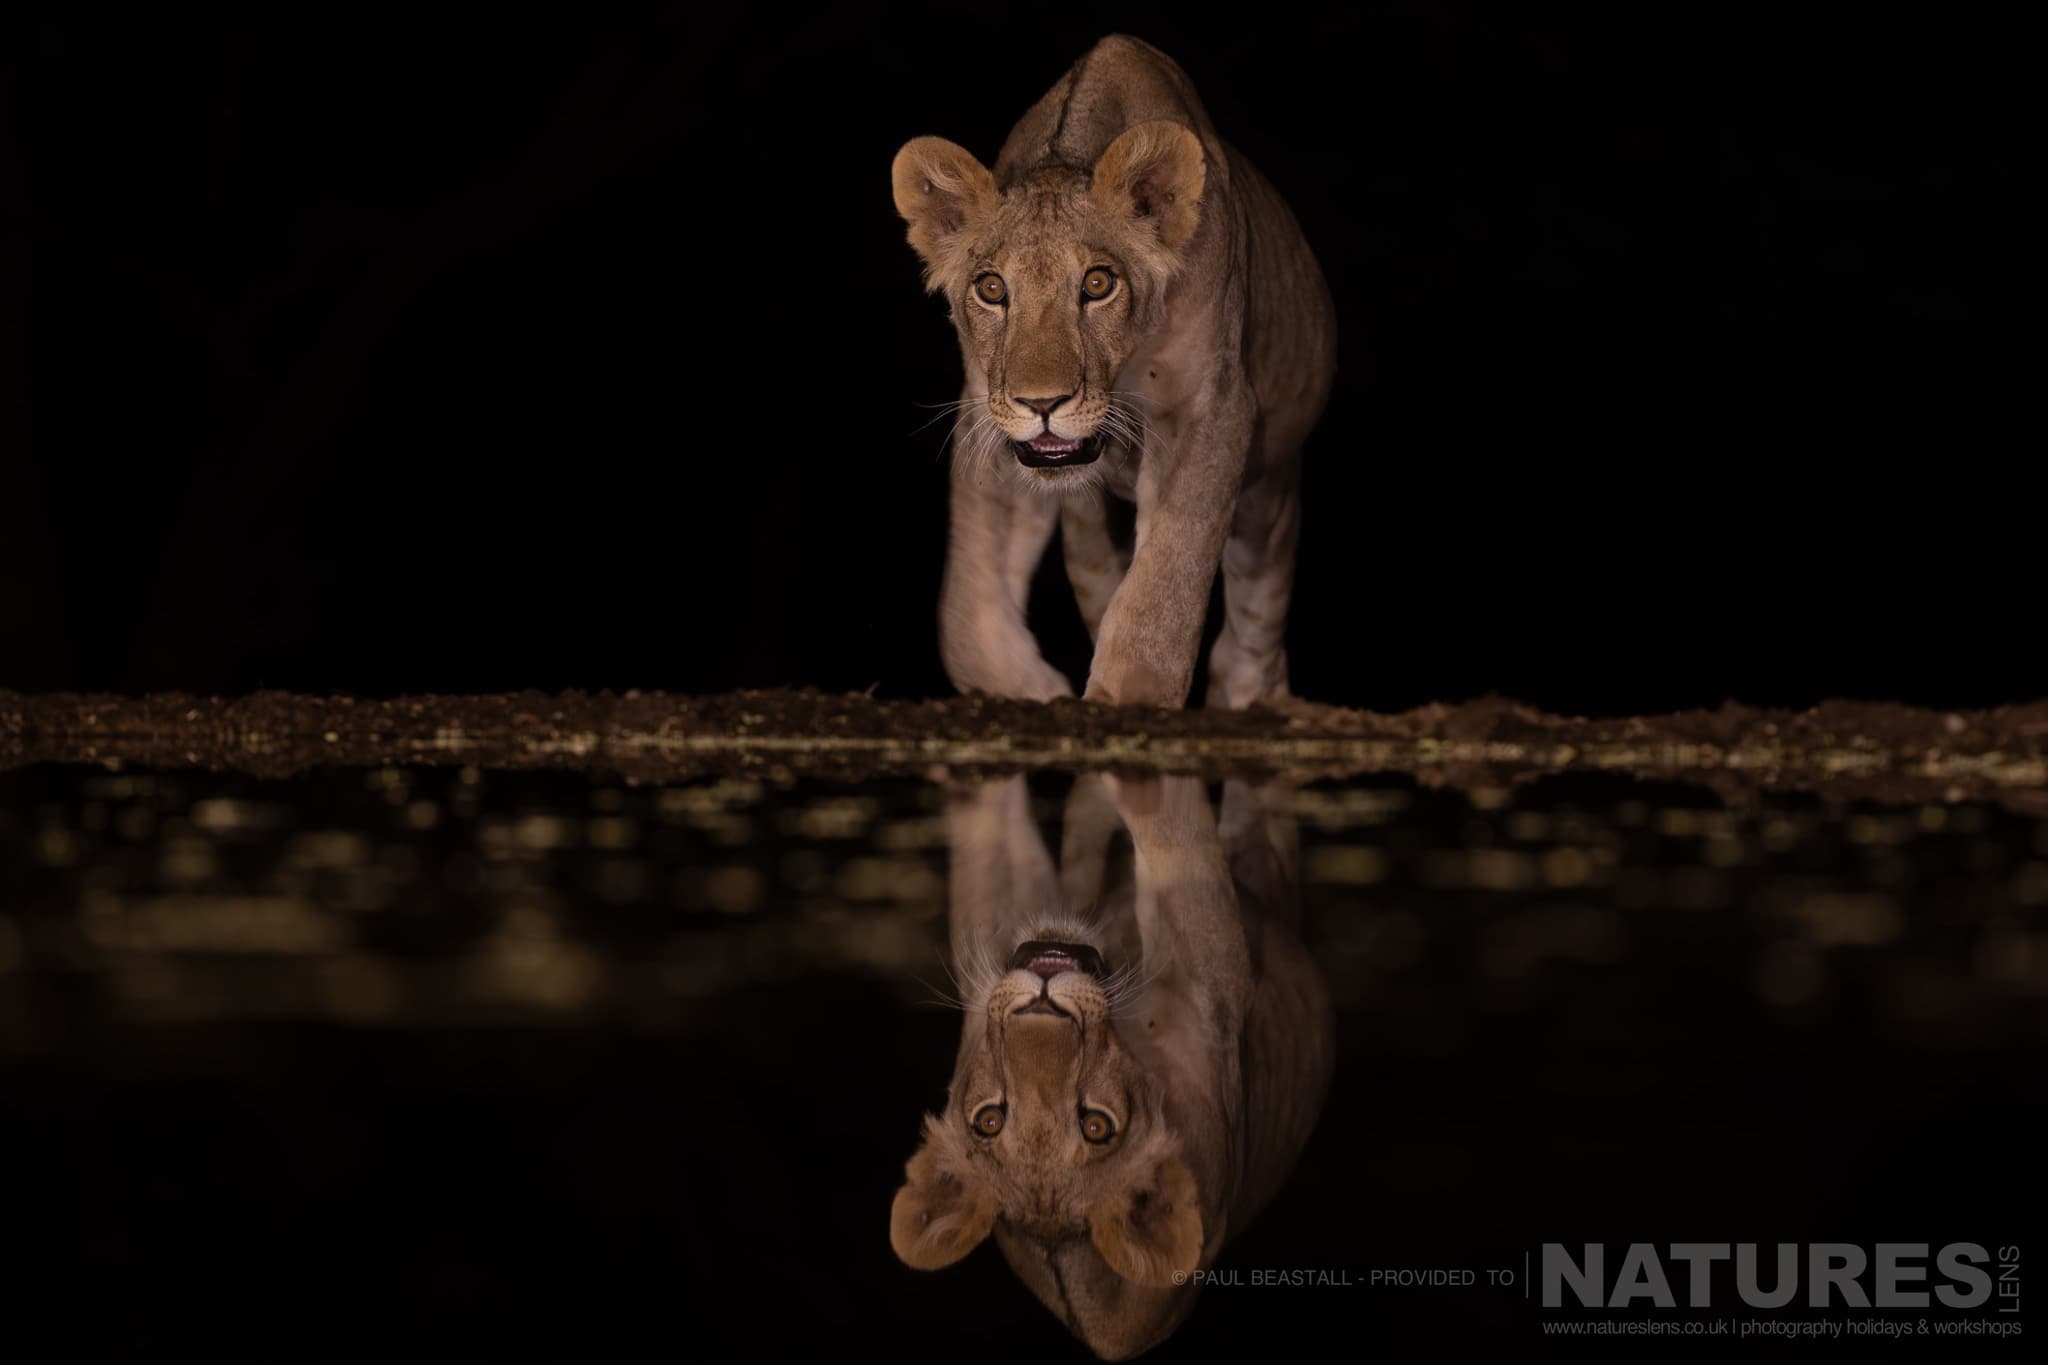 A Solo Lion Cub Approaches The Waterhole At Night Photographed By Paul Beastall During A Photography Holiday In The Southern Great Rift Valley With Natureslens